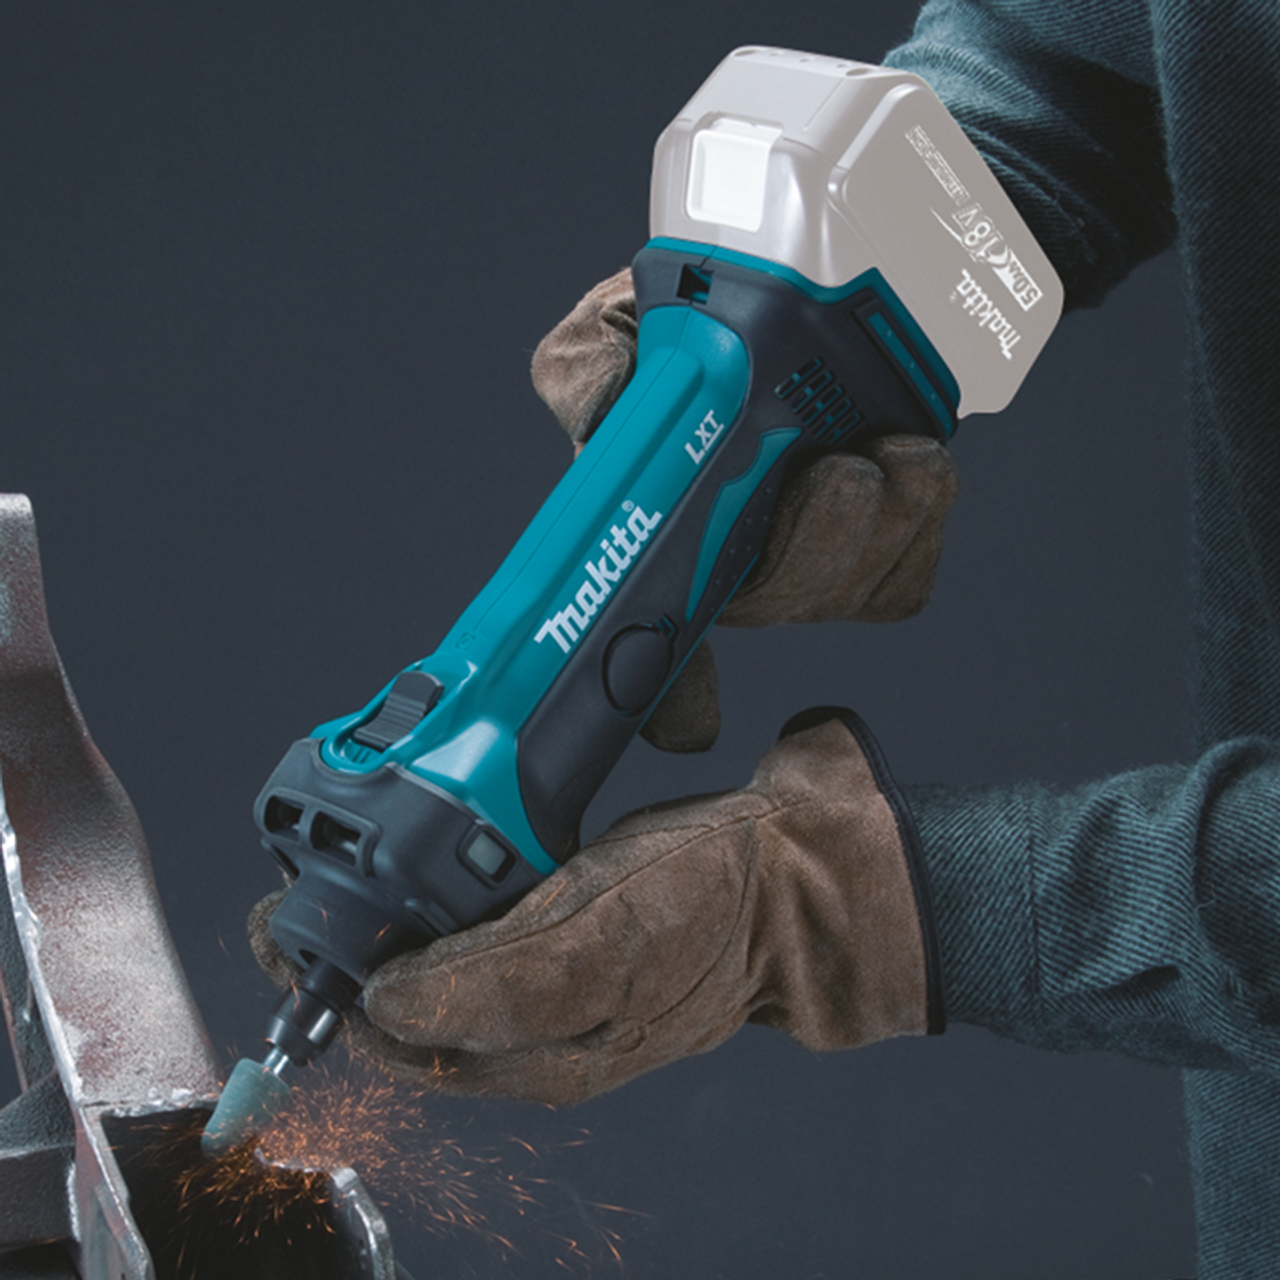 18V LXT? Lithium-Ion Cordless 1/4" Compact Die Grinder, Tool Only, Short neck design, XDG02Z